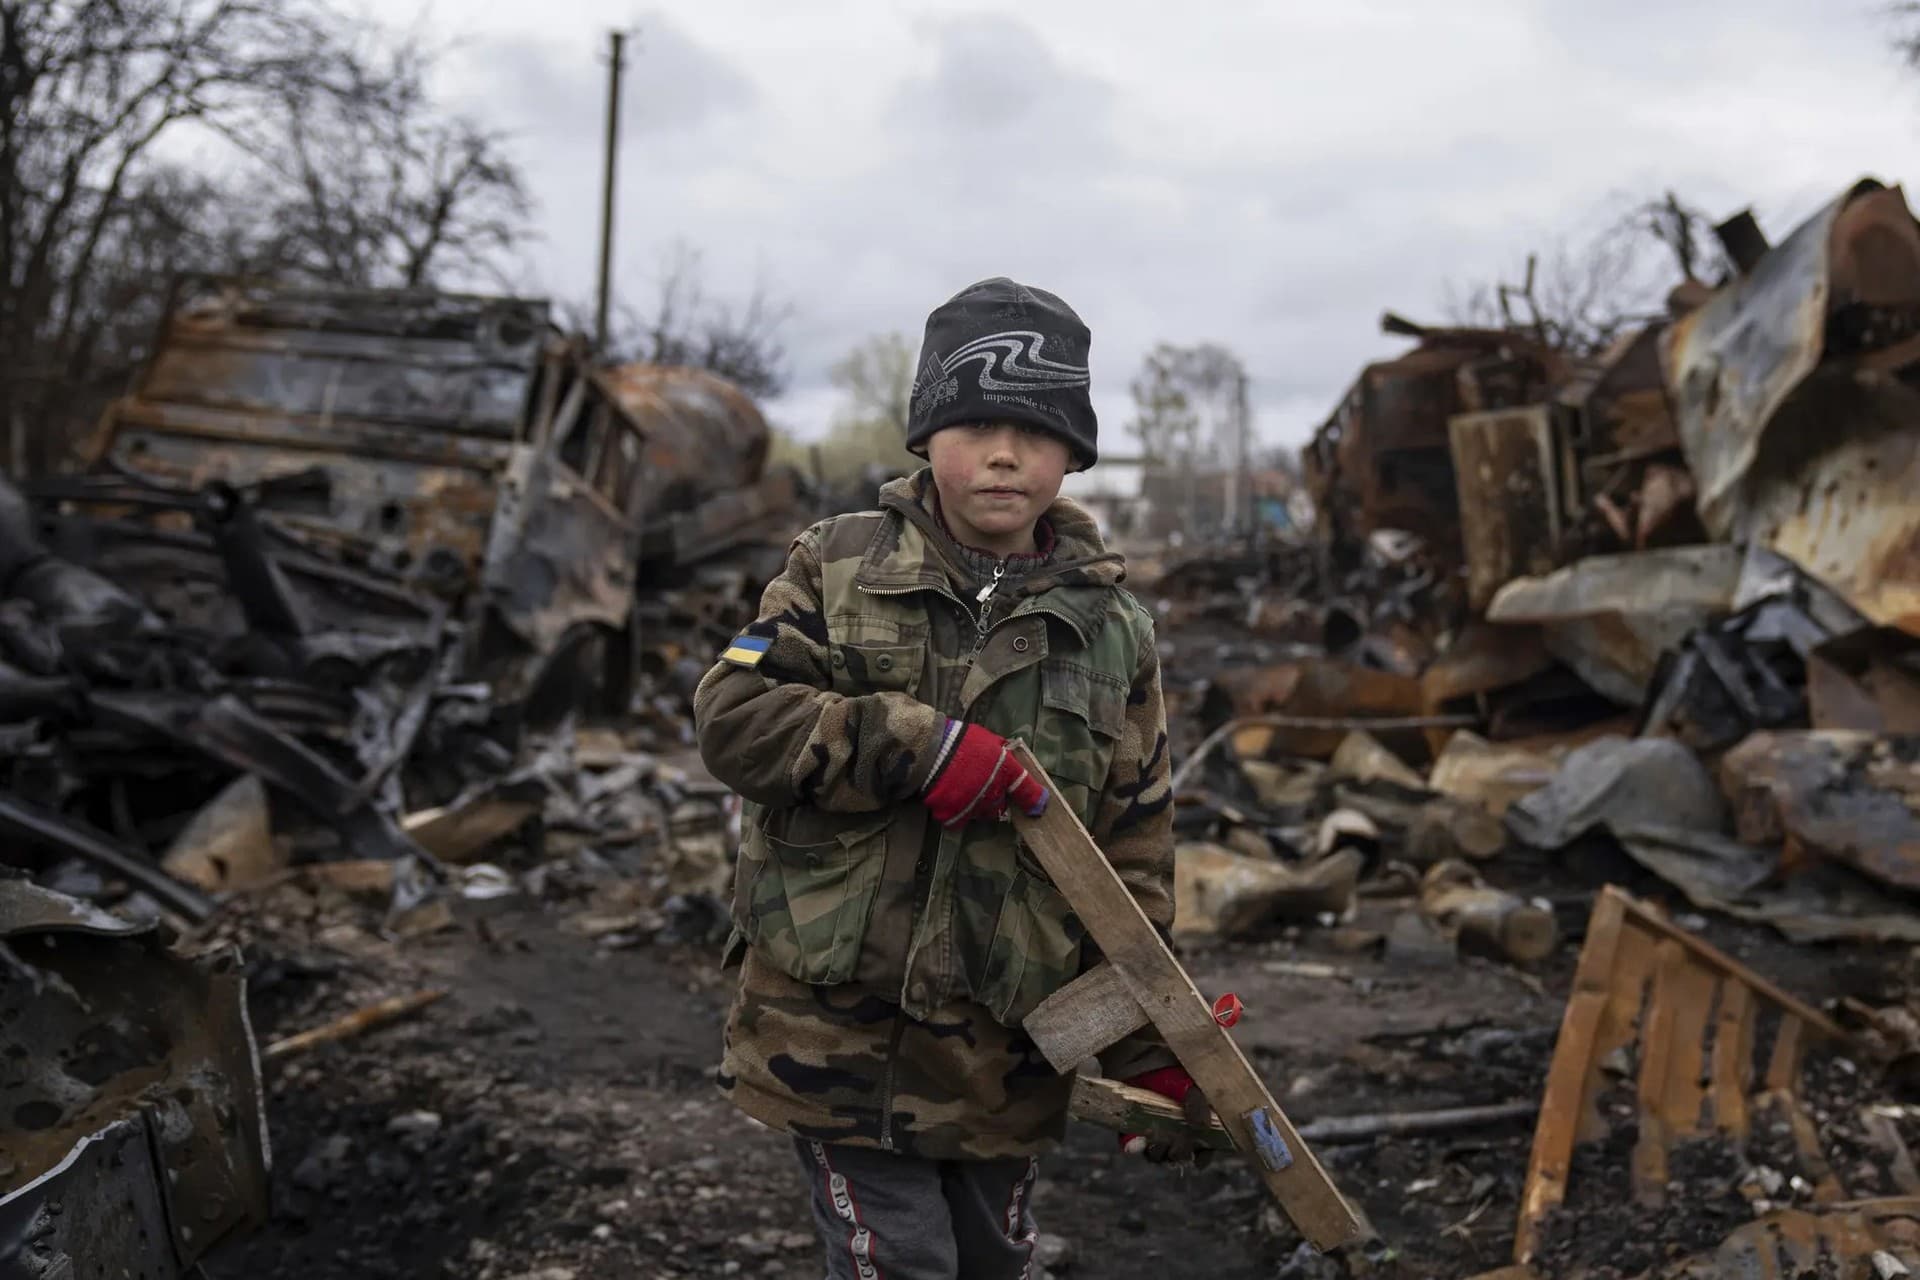 Yehor, seven, holds a wooden toy rifle next to destroyed Russian military vehicles near Chernihiv